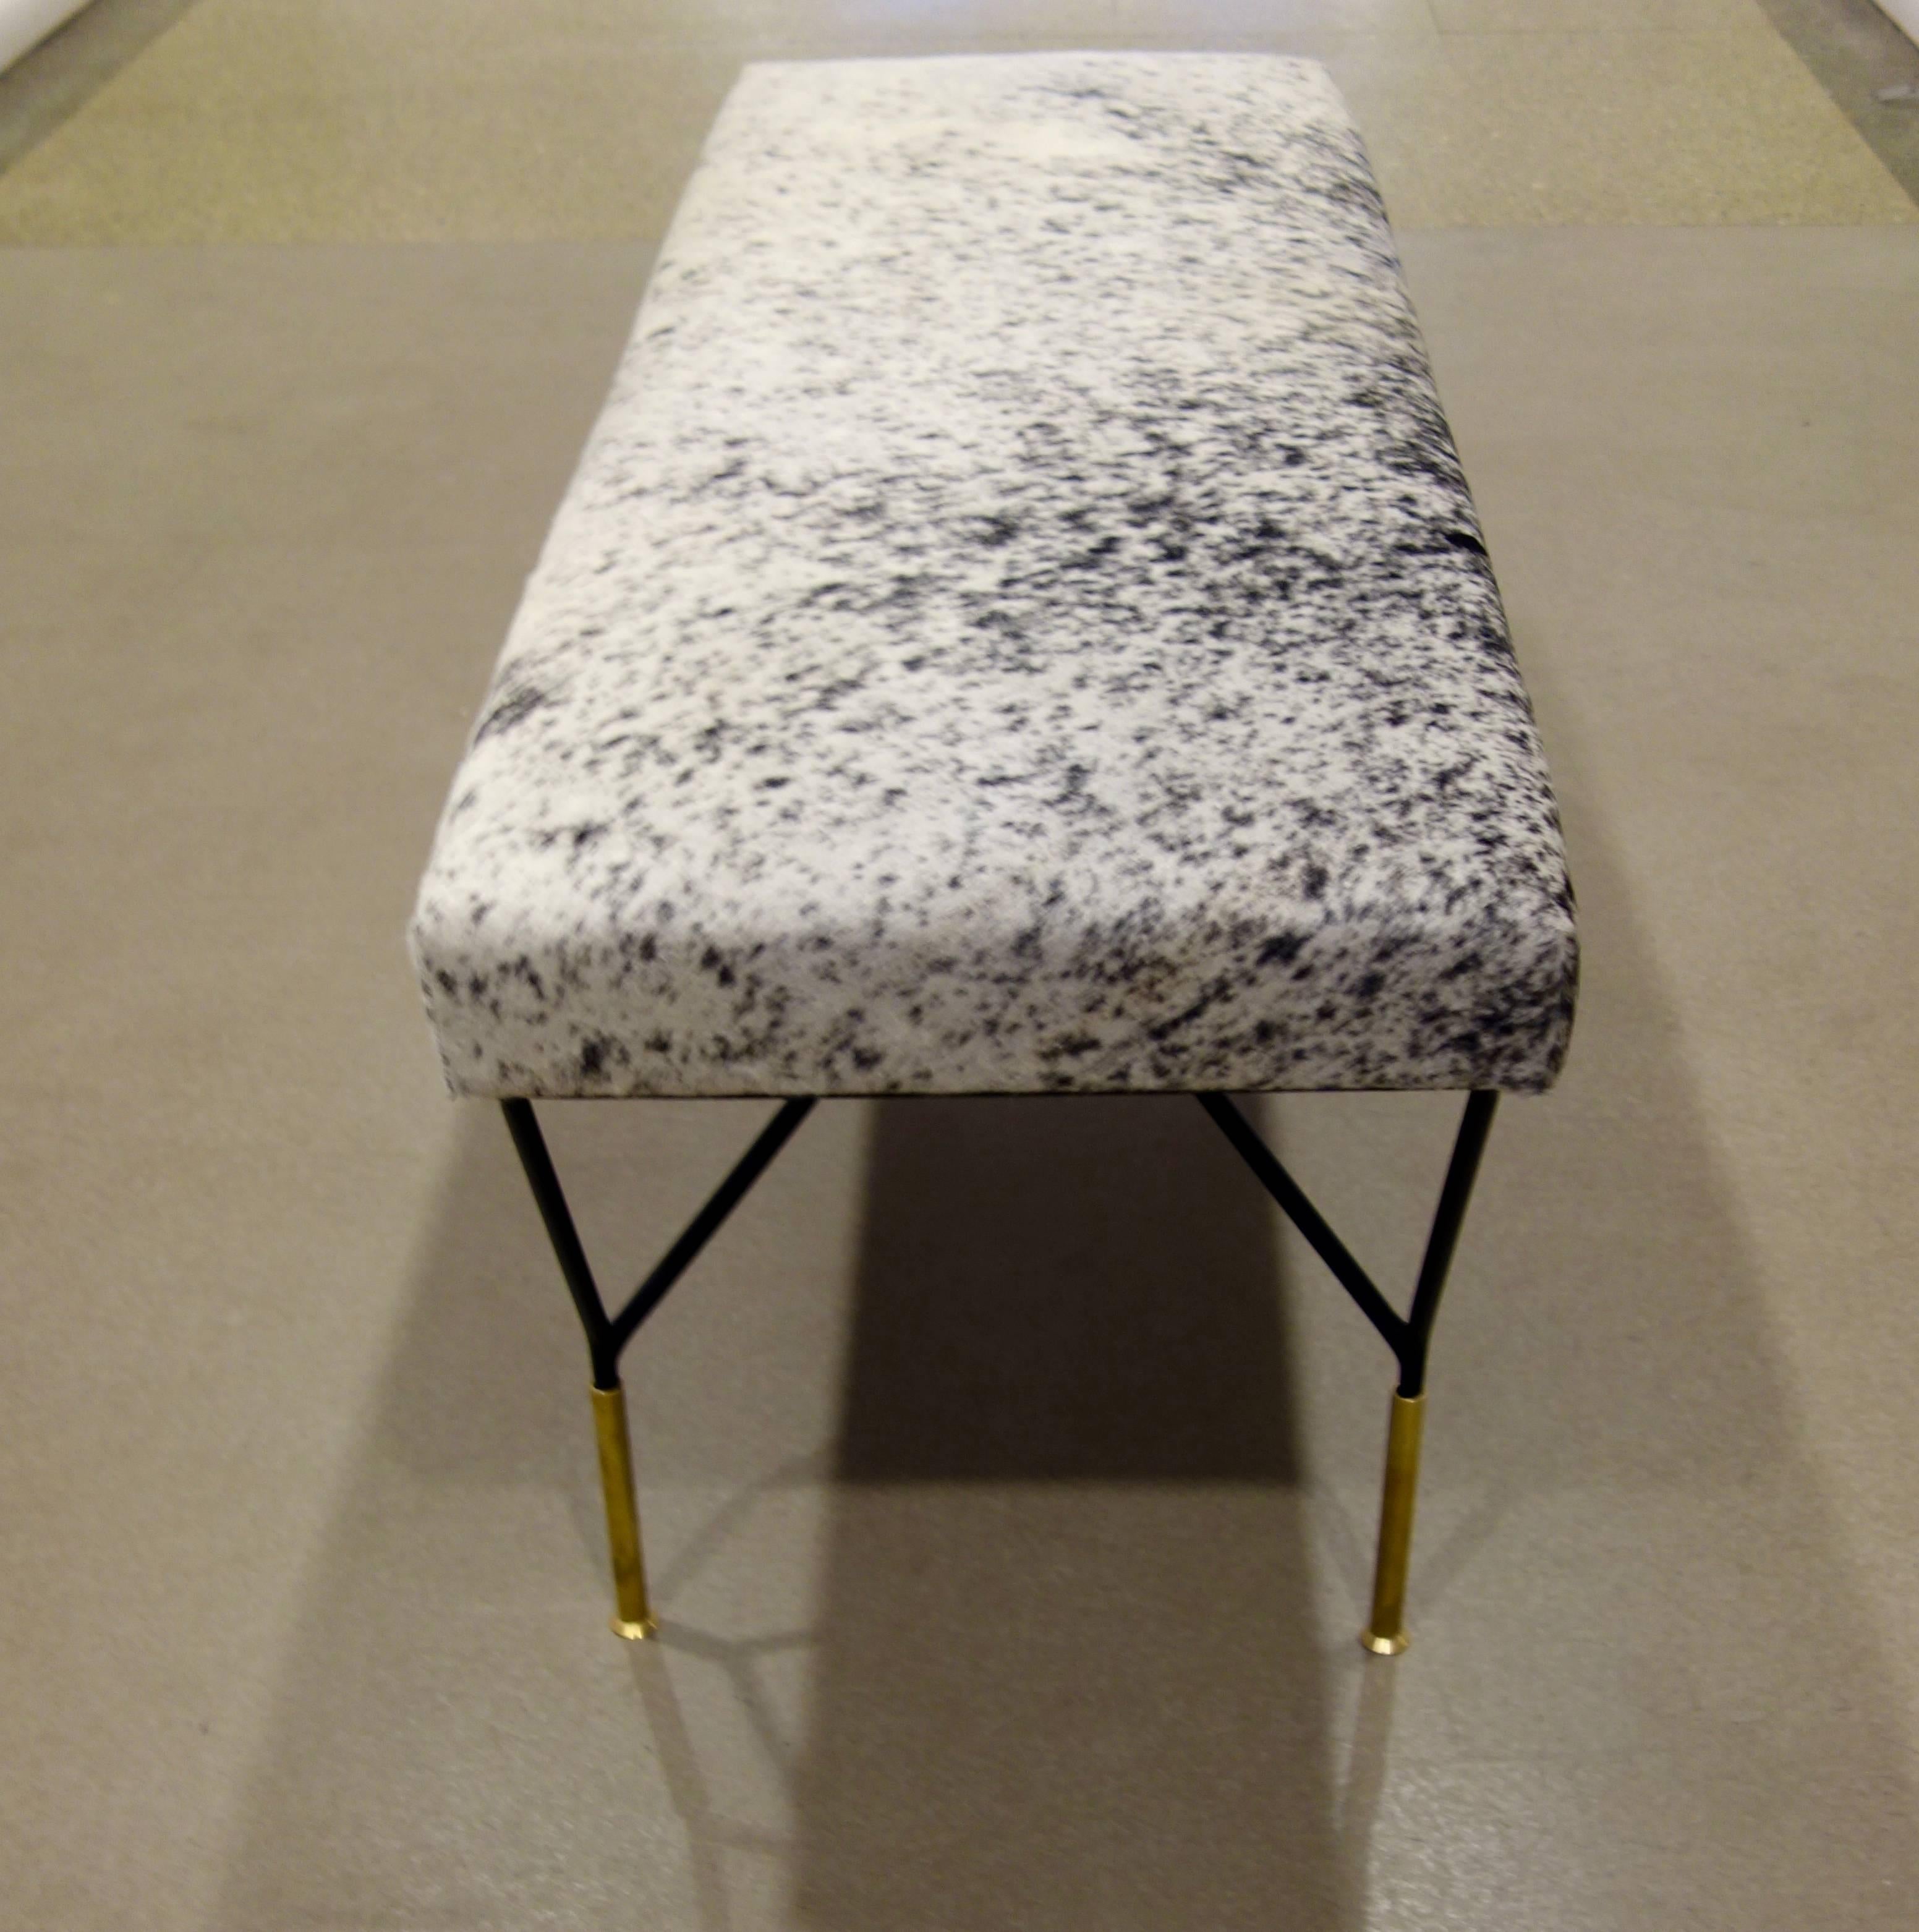 An Italian Mid-Century bench, the top newly upholstered in black and white cowhide, resting on black metal legs each attached at two points from the underside of the seat forming a triangle, ending in a single, elongated brass foot. 
Another bench